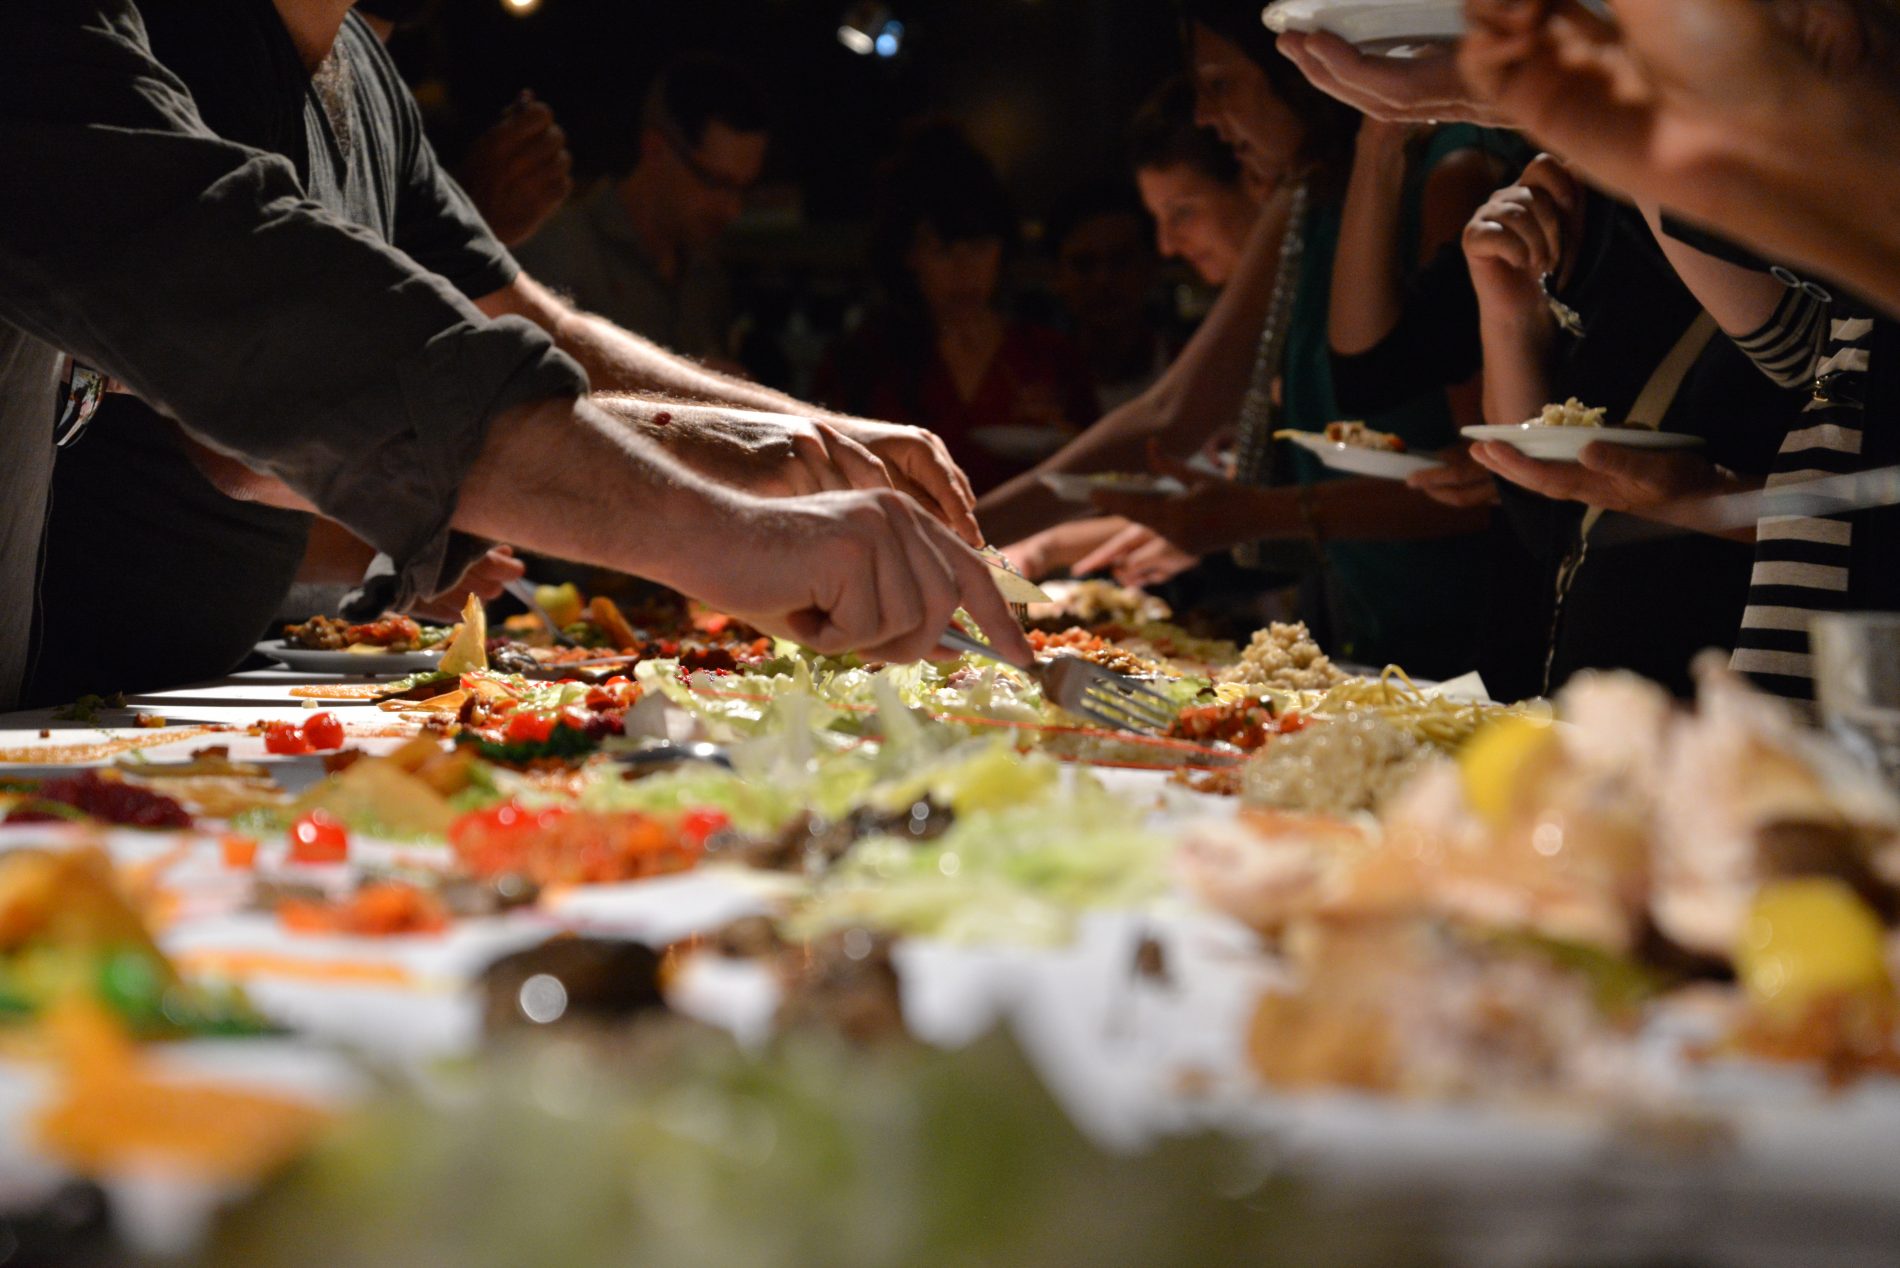 CLOSE UP OF HANDS AND UTENSILS GRABBING FOOD THAT COVER A TABLE IN SEMI-ANNUAL DINNER CLUB CALLED IN THE MOUTH